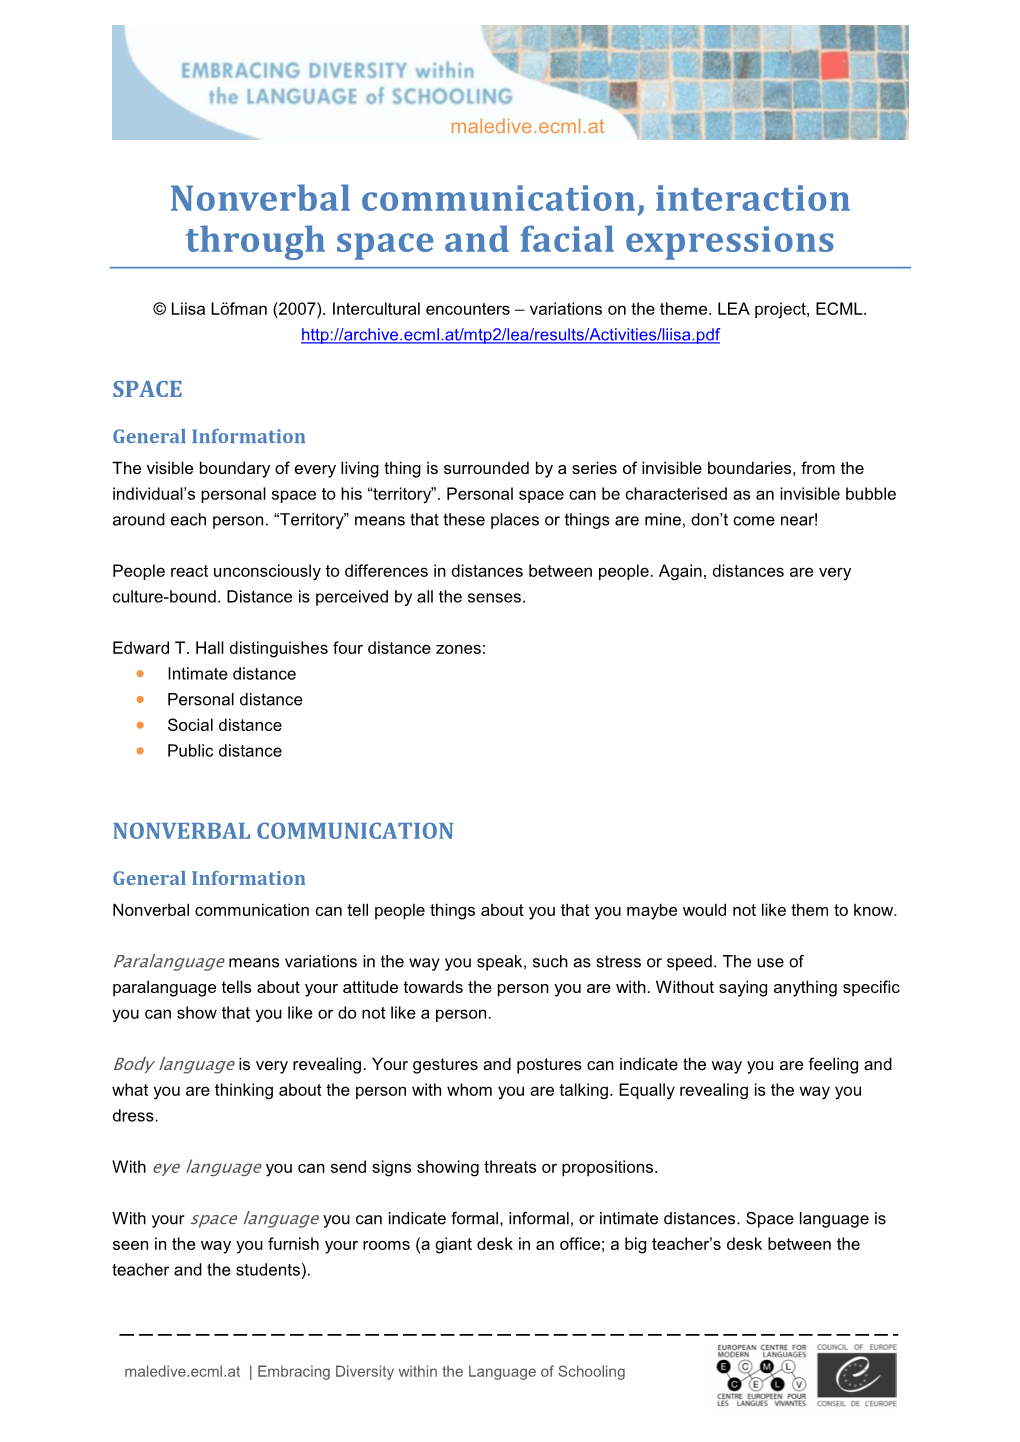 Nonverbal Communication, Interaction Through Space and Facial Expressions